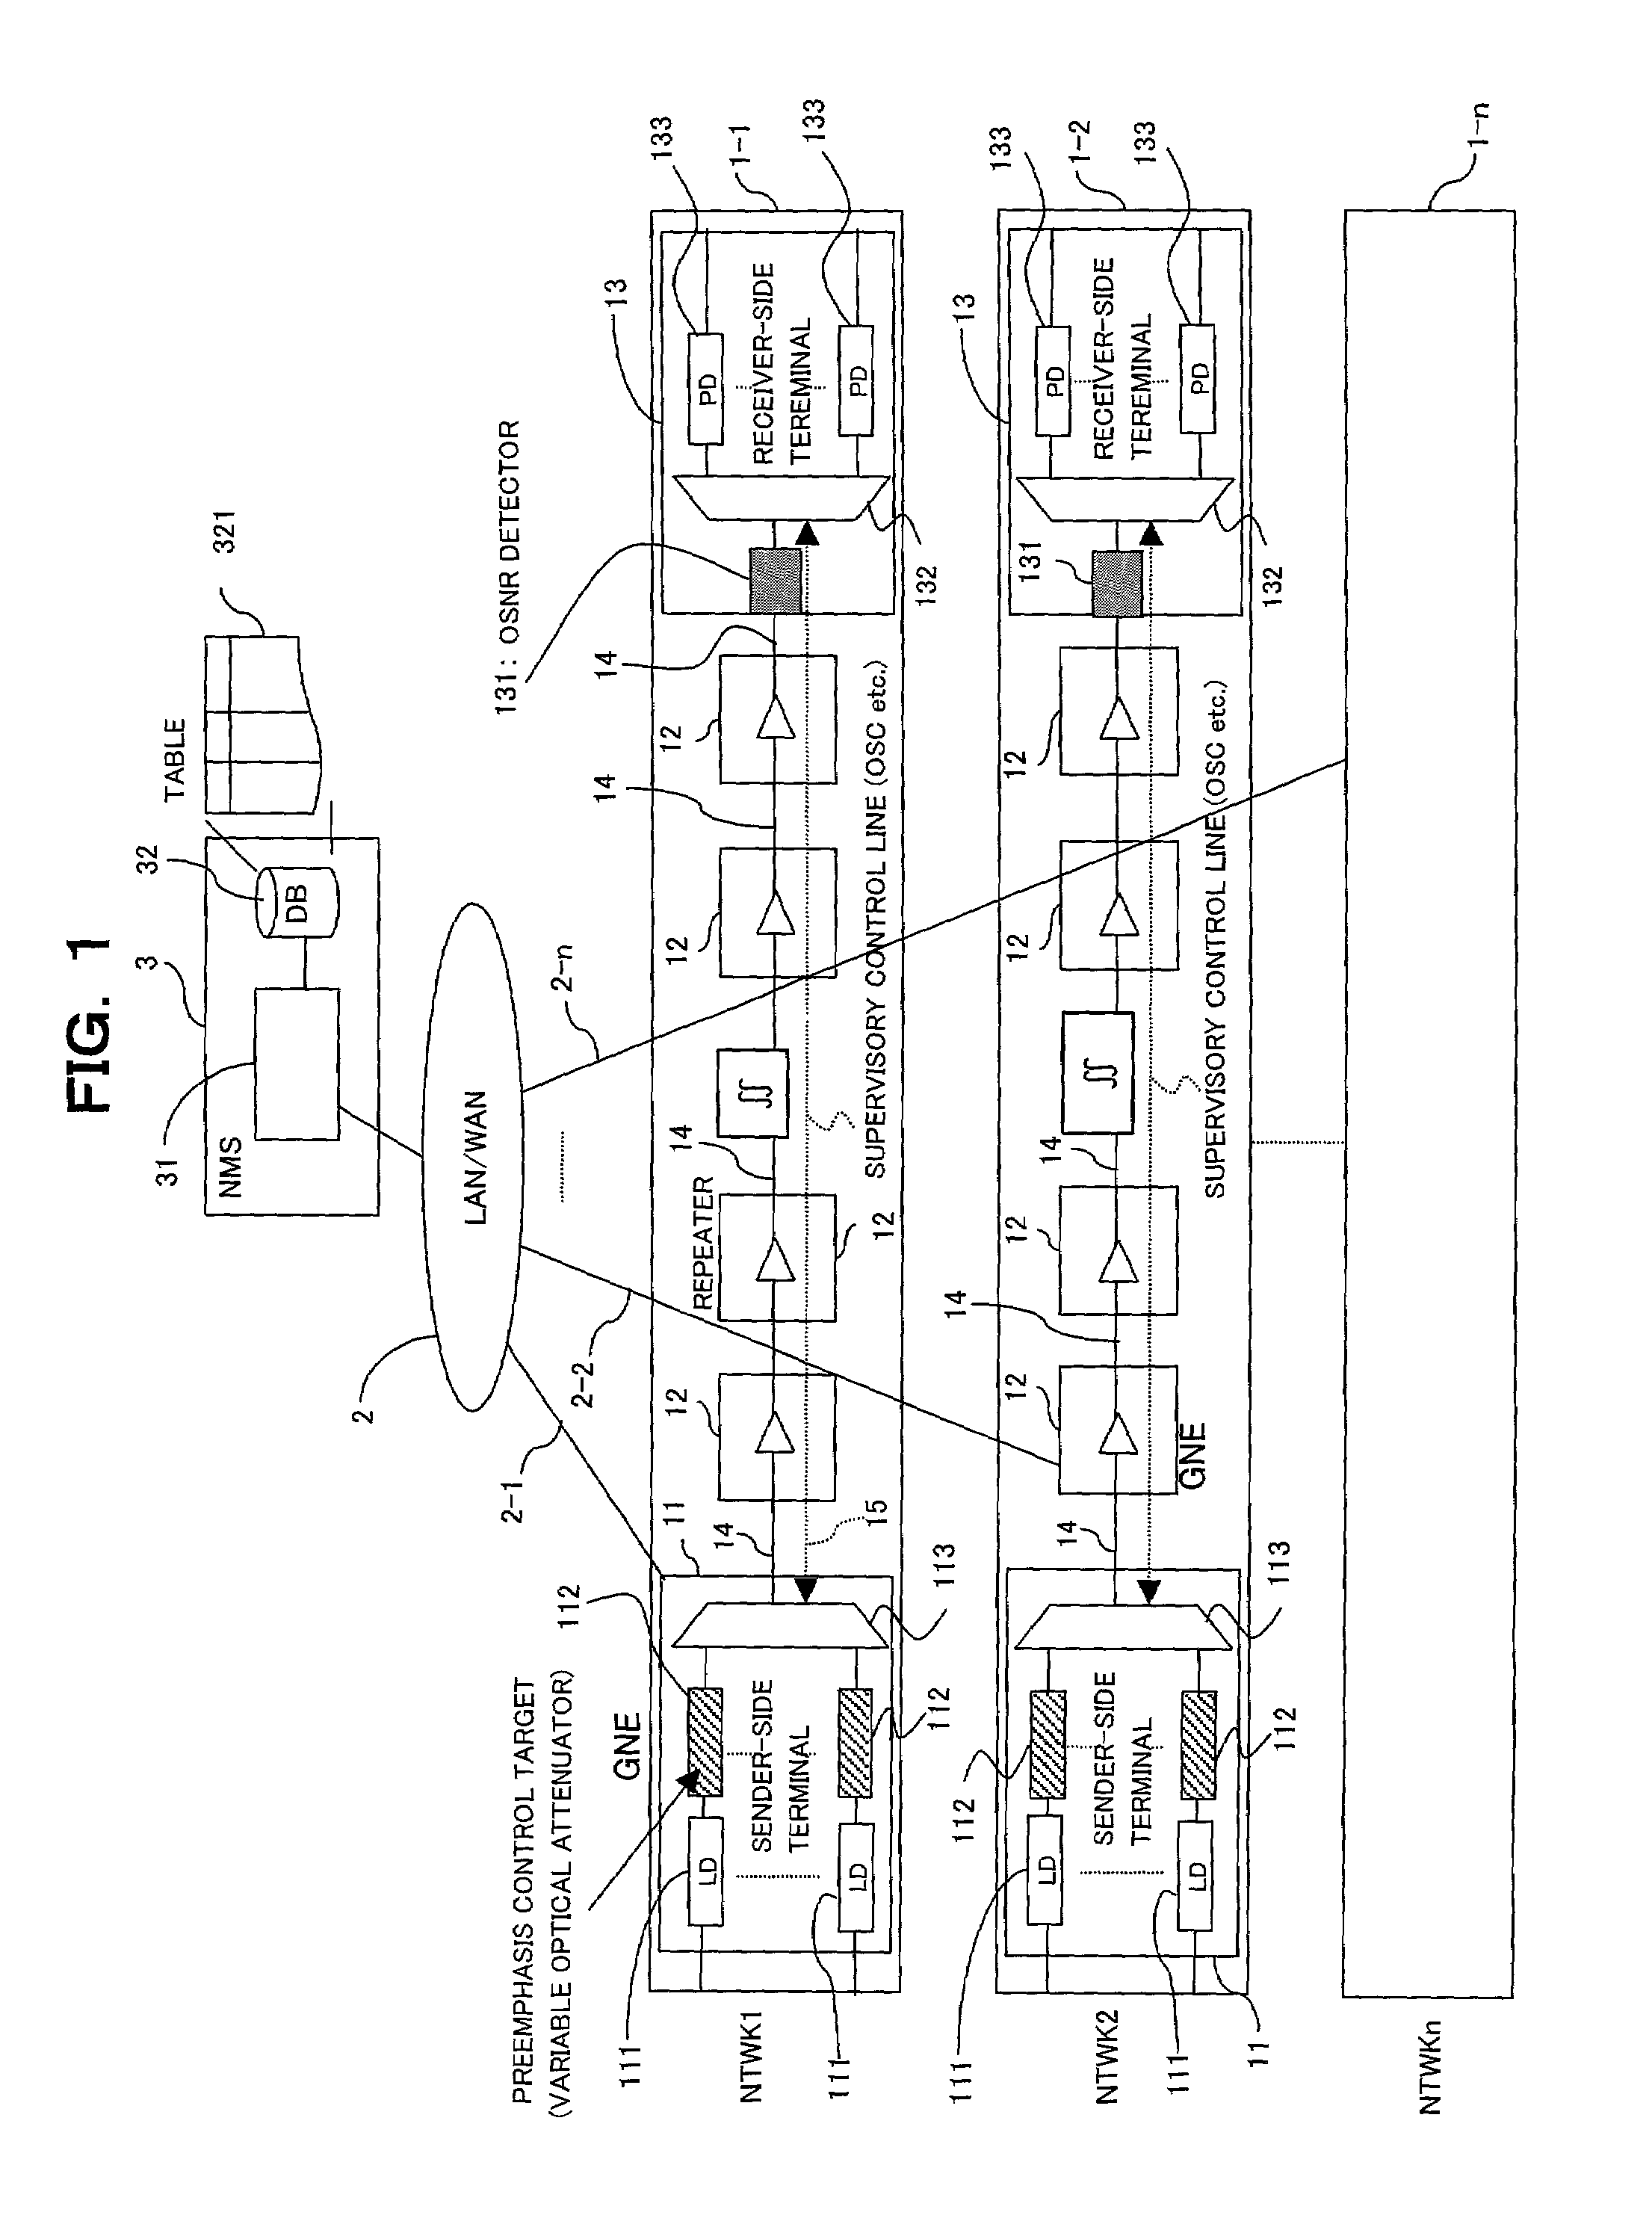 WDM transmission system, central controller for the system, and method for controlling preemphasis in the system